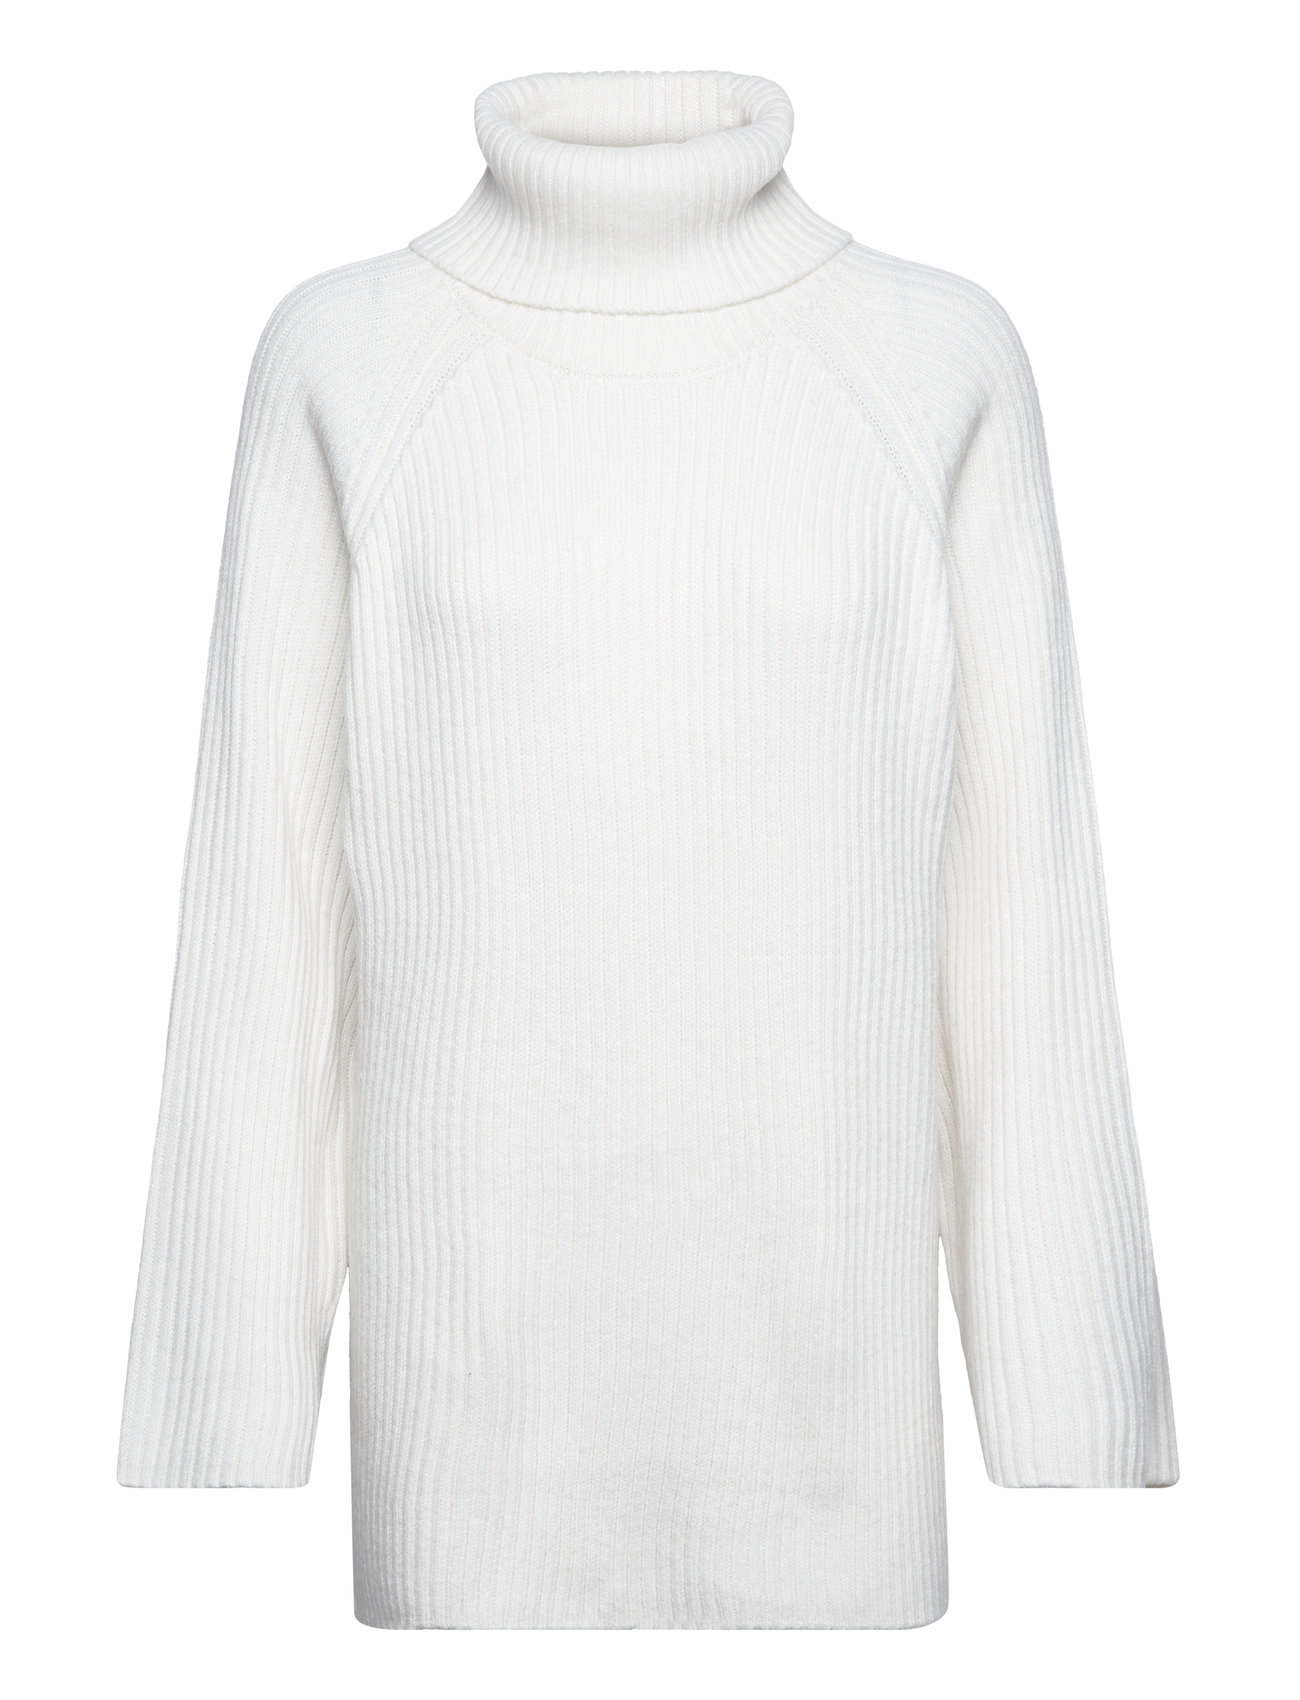 Roll-Neck Knitted Sweater Tops Knitwear Turtleneck White Gina Tricot